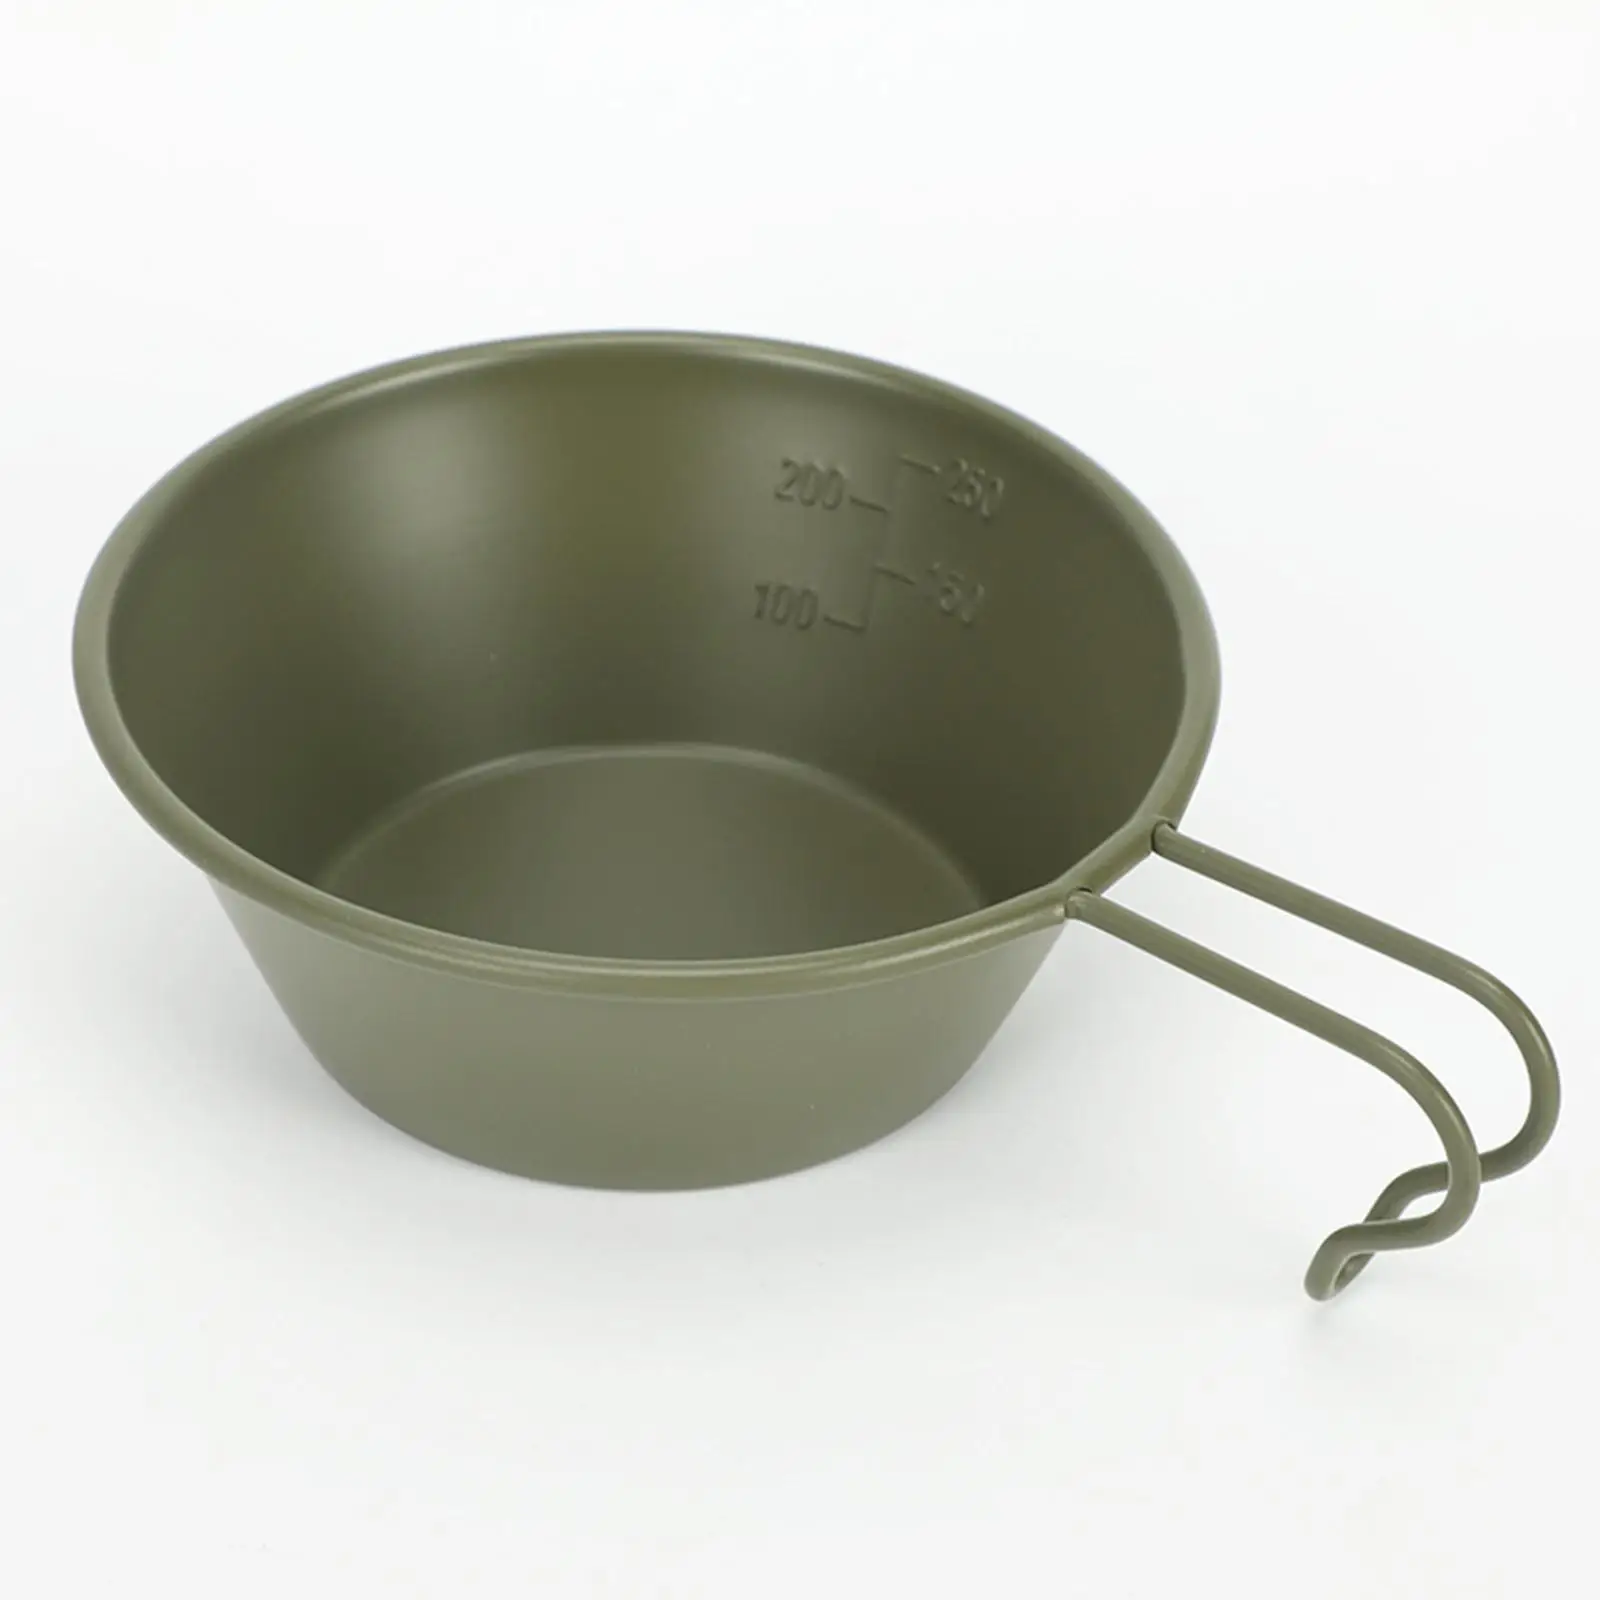 Stainless Steel Camping Bowl Outdoor Dinnerware with Handle for Fishing BBQ